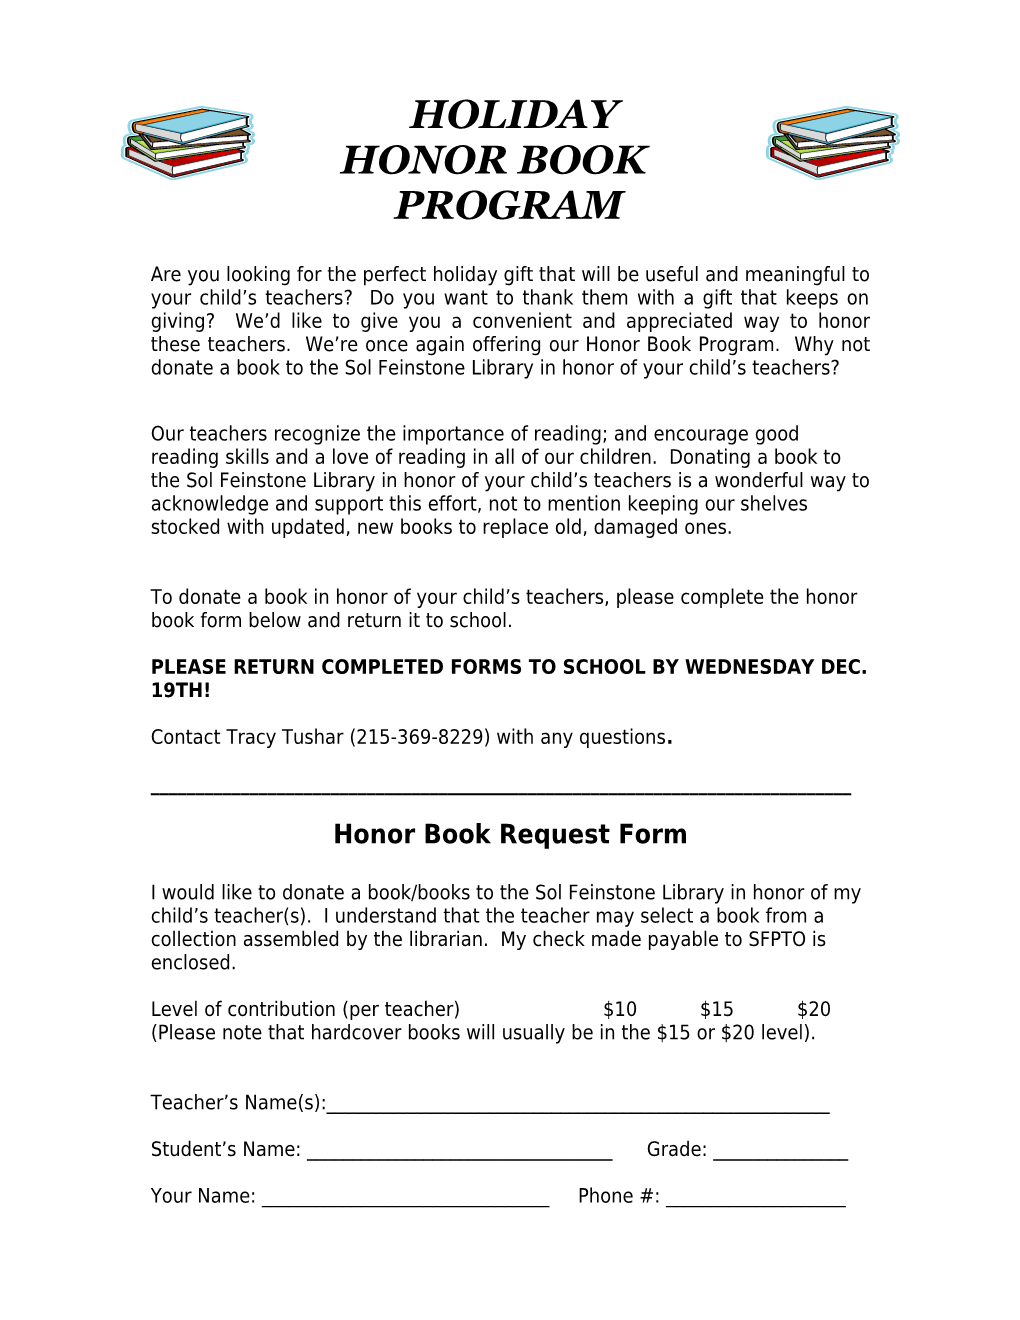 End of the Year Honor Book Class Contest Request Form